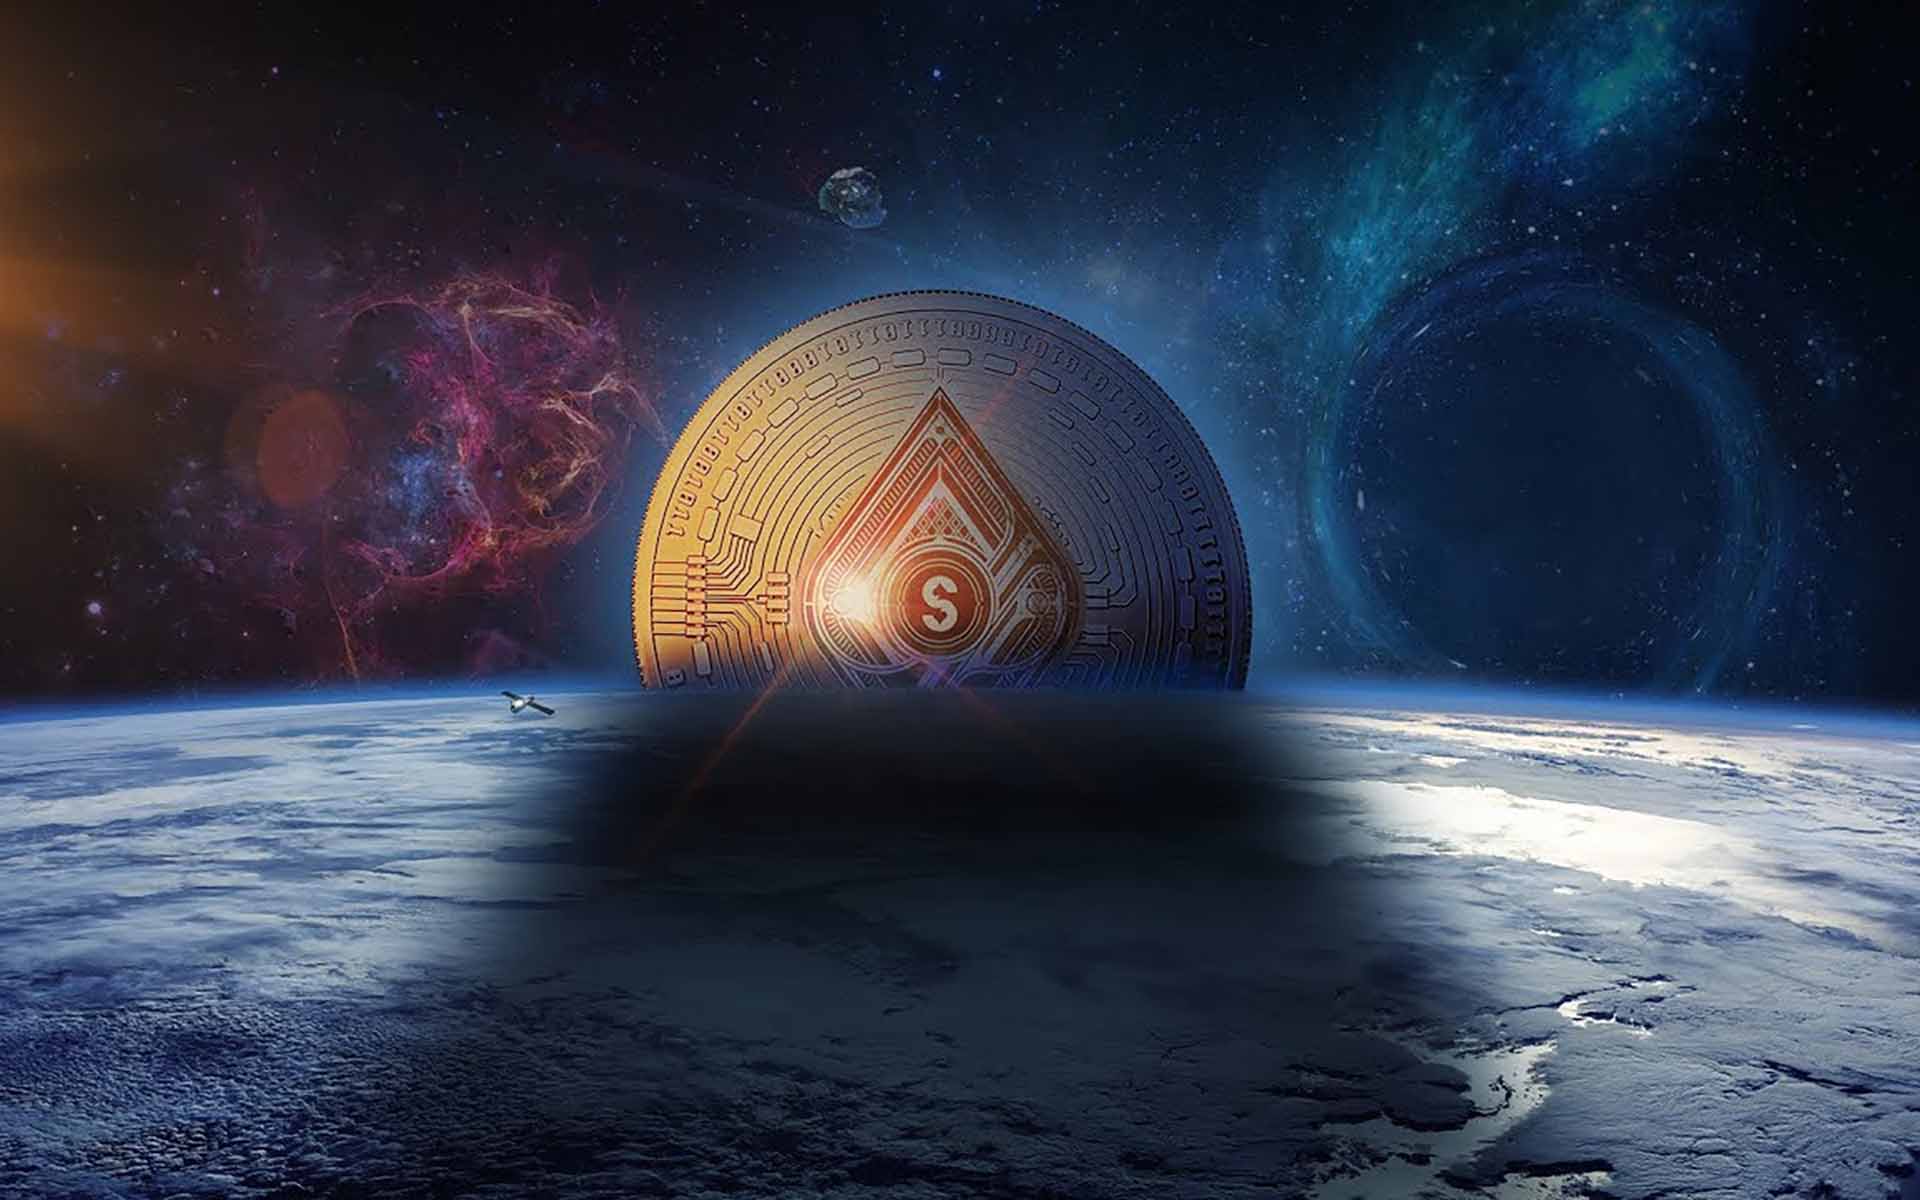 Sp8de Once Again Strikes Gold with the Addition of Two More Top Advisors